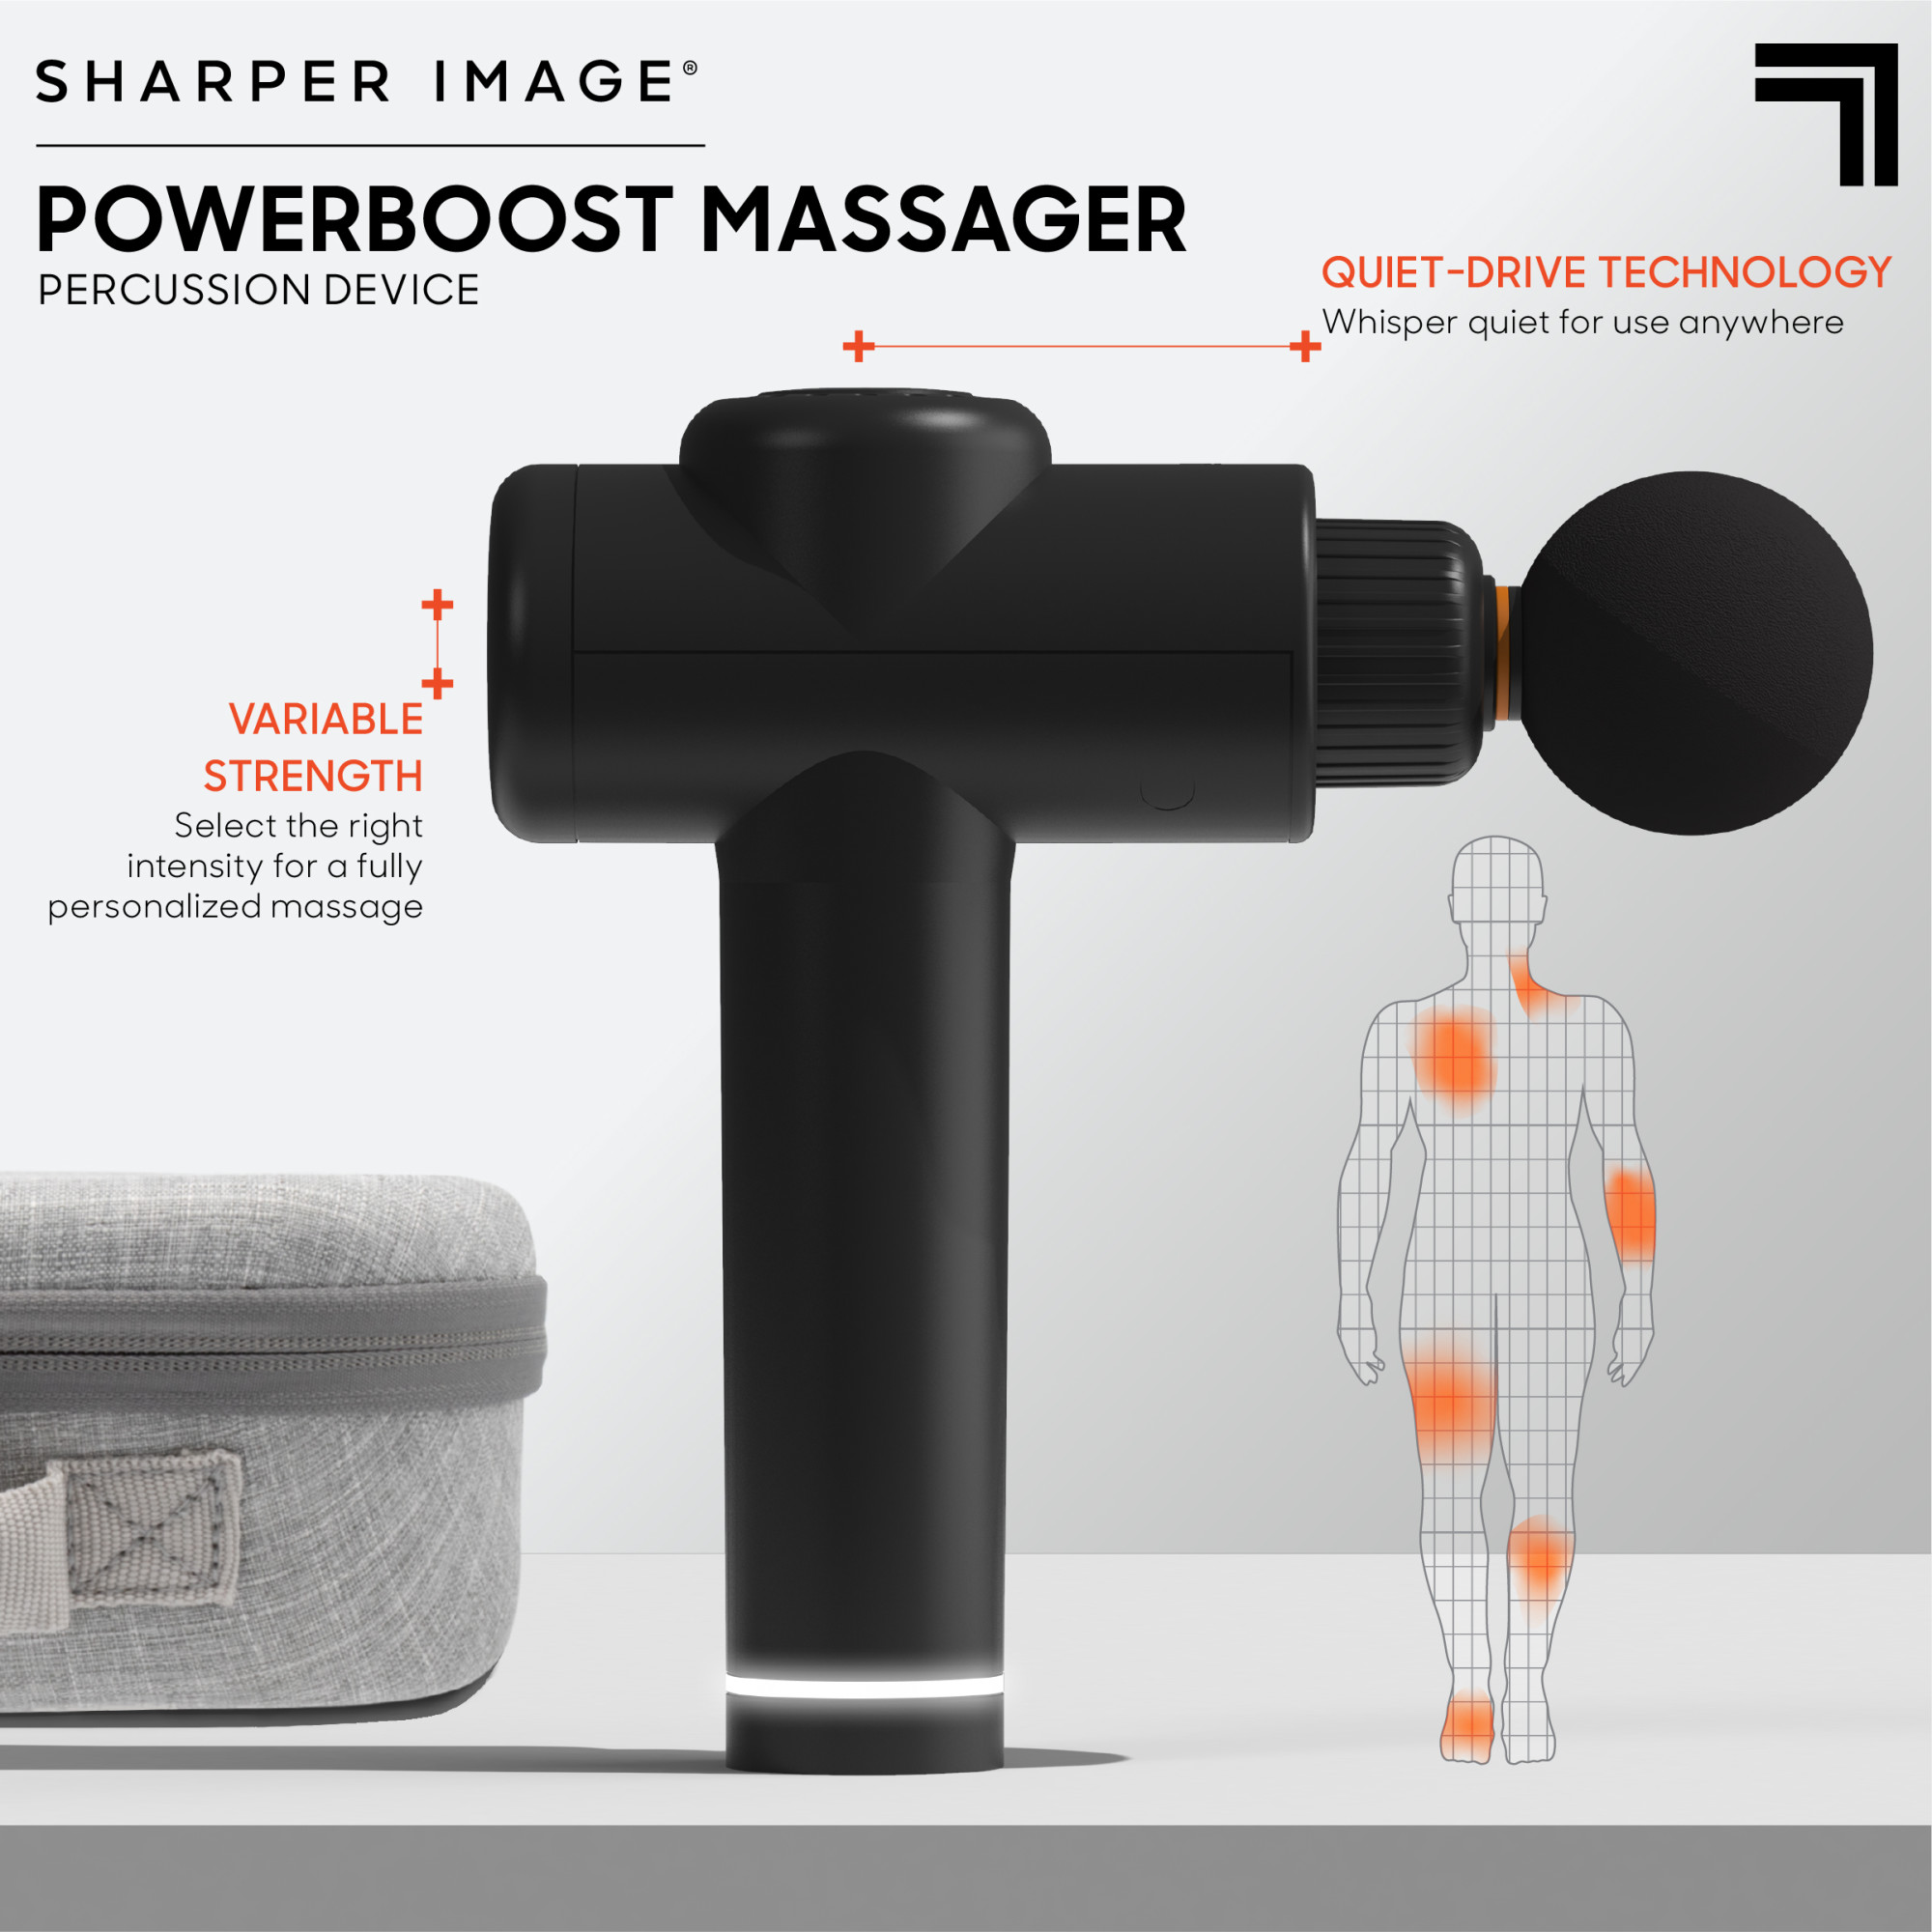 Sharper Image® Powerboost® Deep Tissue Percussion Massager, Massage Gun with 5 Attachments, Whisper Quiet Operation, Variable Strength - image 3 of 15